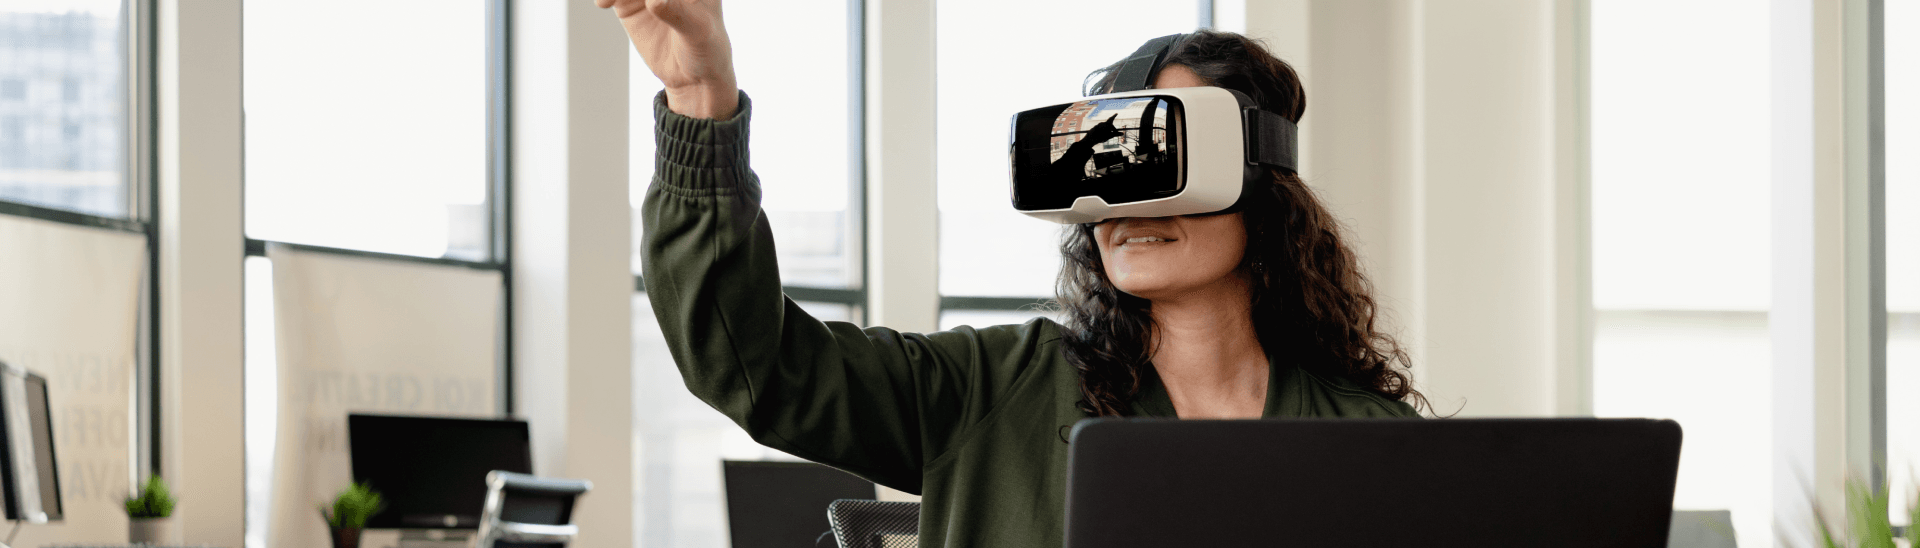 Explore the metaverse: adding real value to the virtual realm 